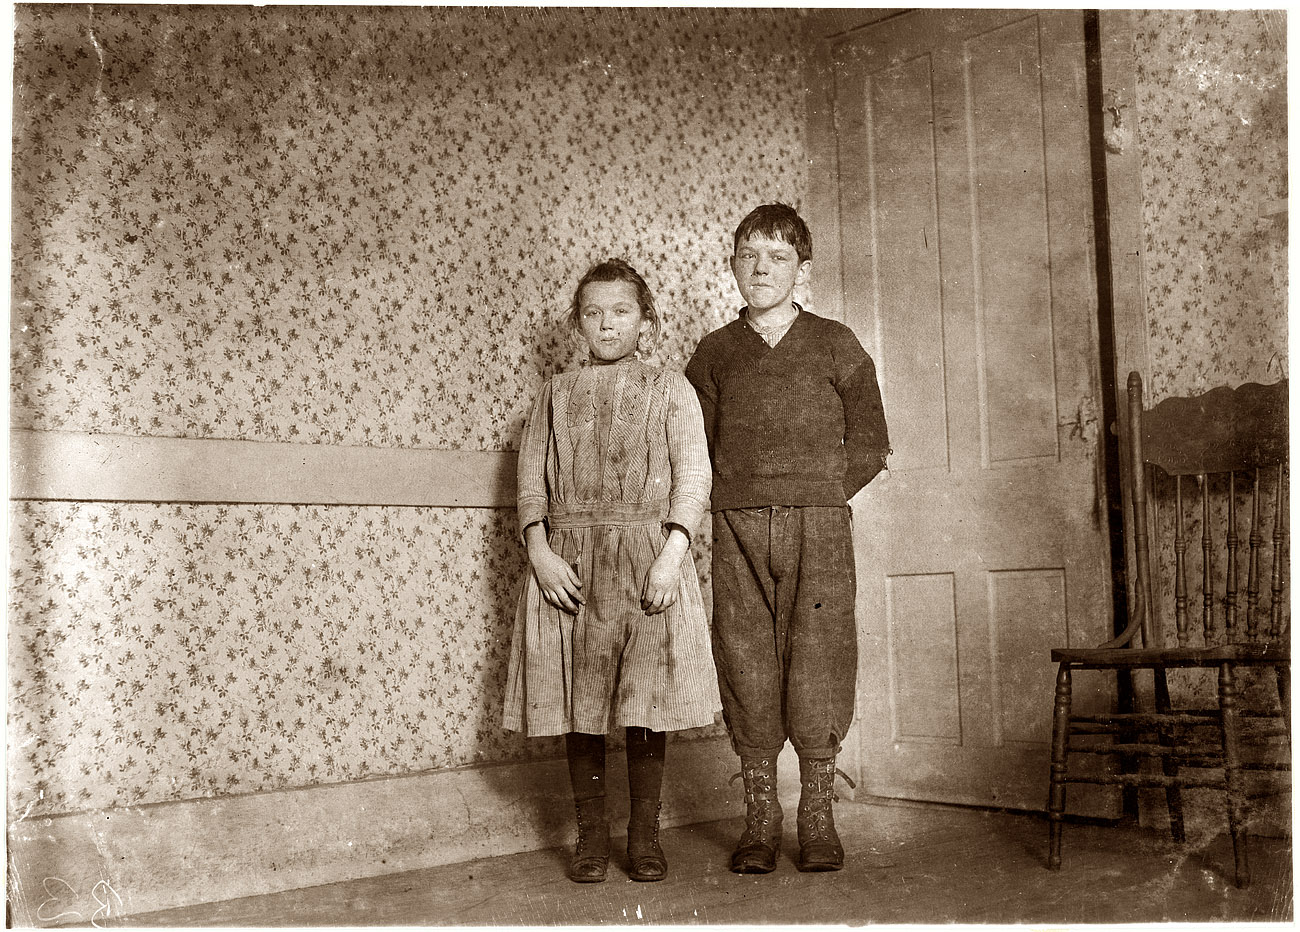 January 1912. "Veronica Mikula, says 12 years old, 93 N. Front Street. Steven Mikula (works in mill) says 15 years. Photo taken in spare unused room too cold to warm. They crowd together in kitchen. New Bedford, Massachusetts." View full size. Photograph and caption by Lewis Wickes Hine.